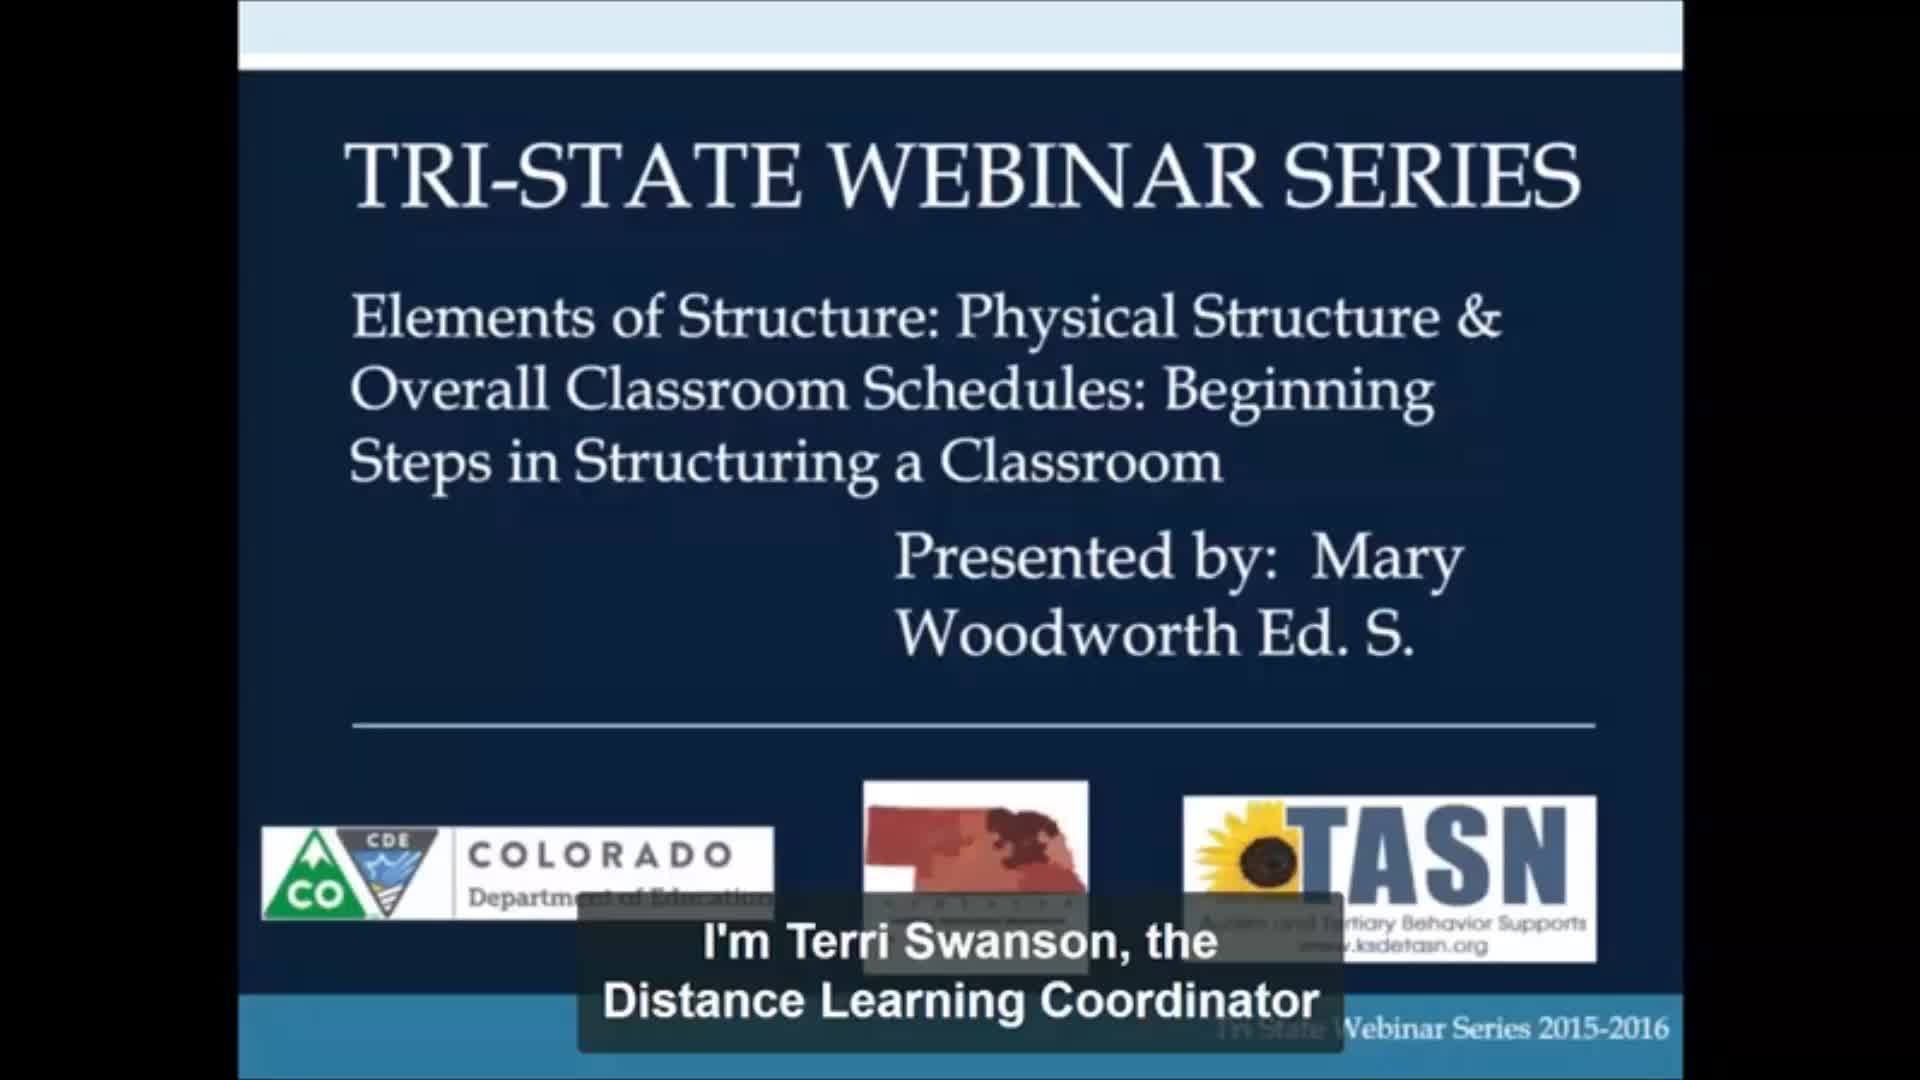 Elements of Structure: Physical Structure & Overall Classroom Schedules: Beginning Steps in Structuring a Classroom